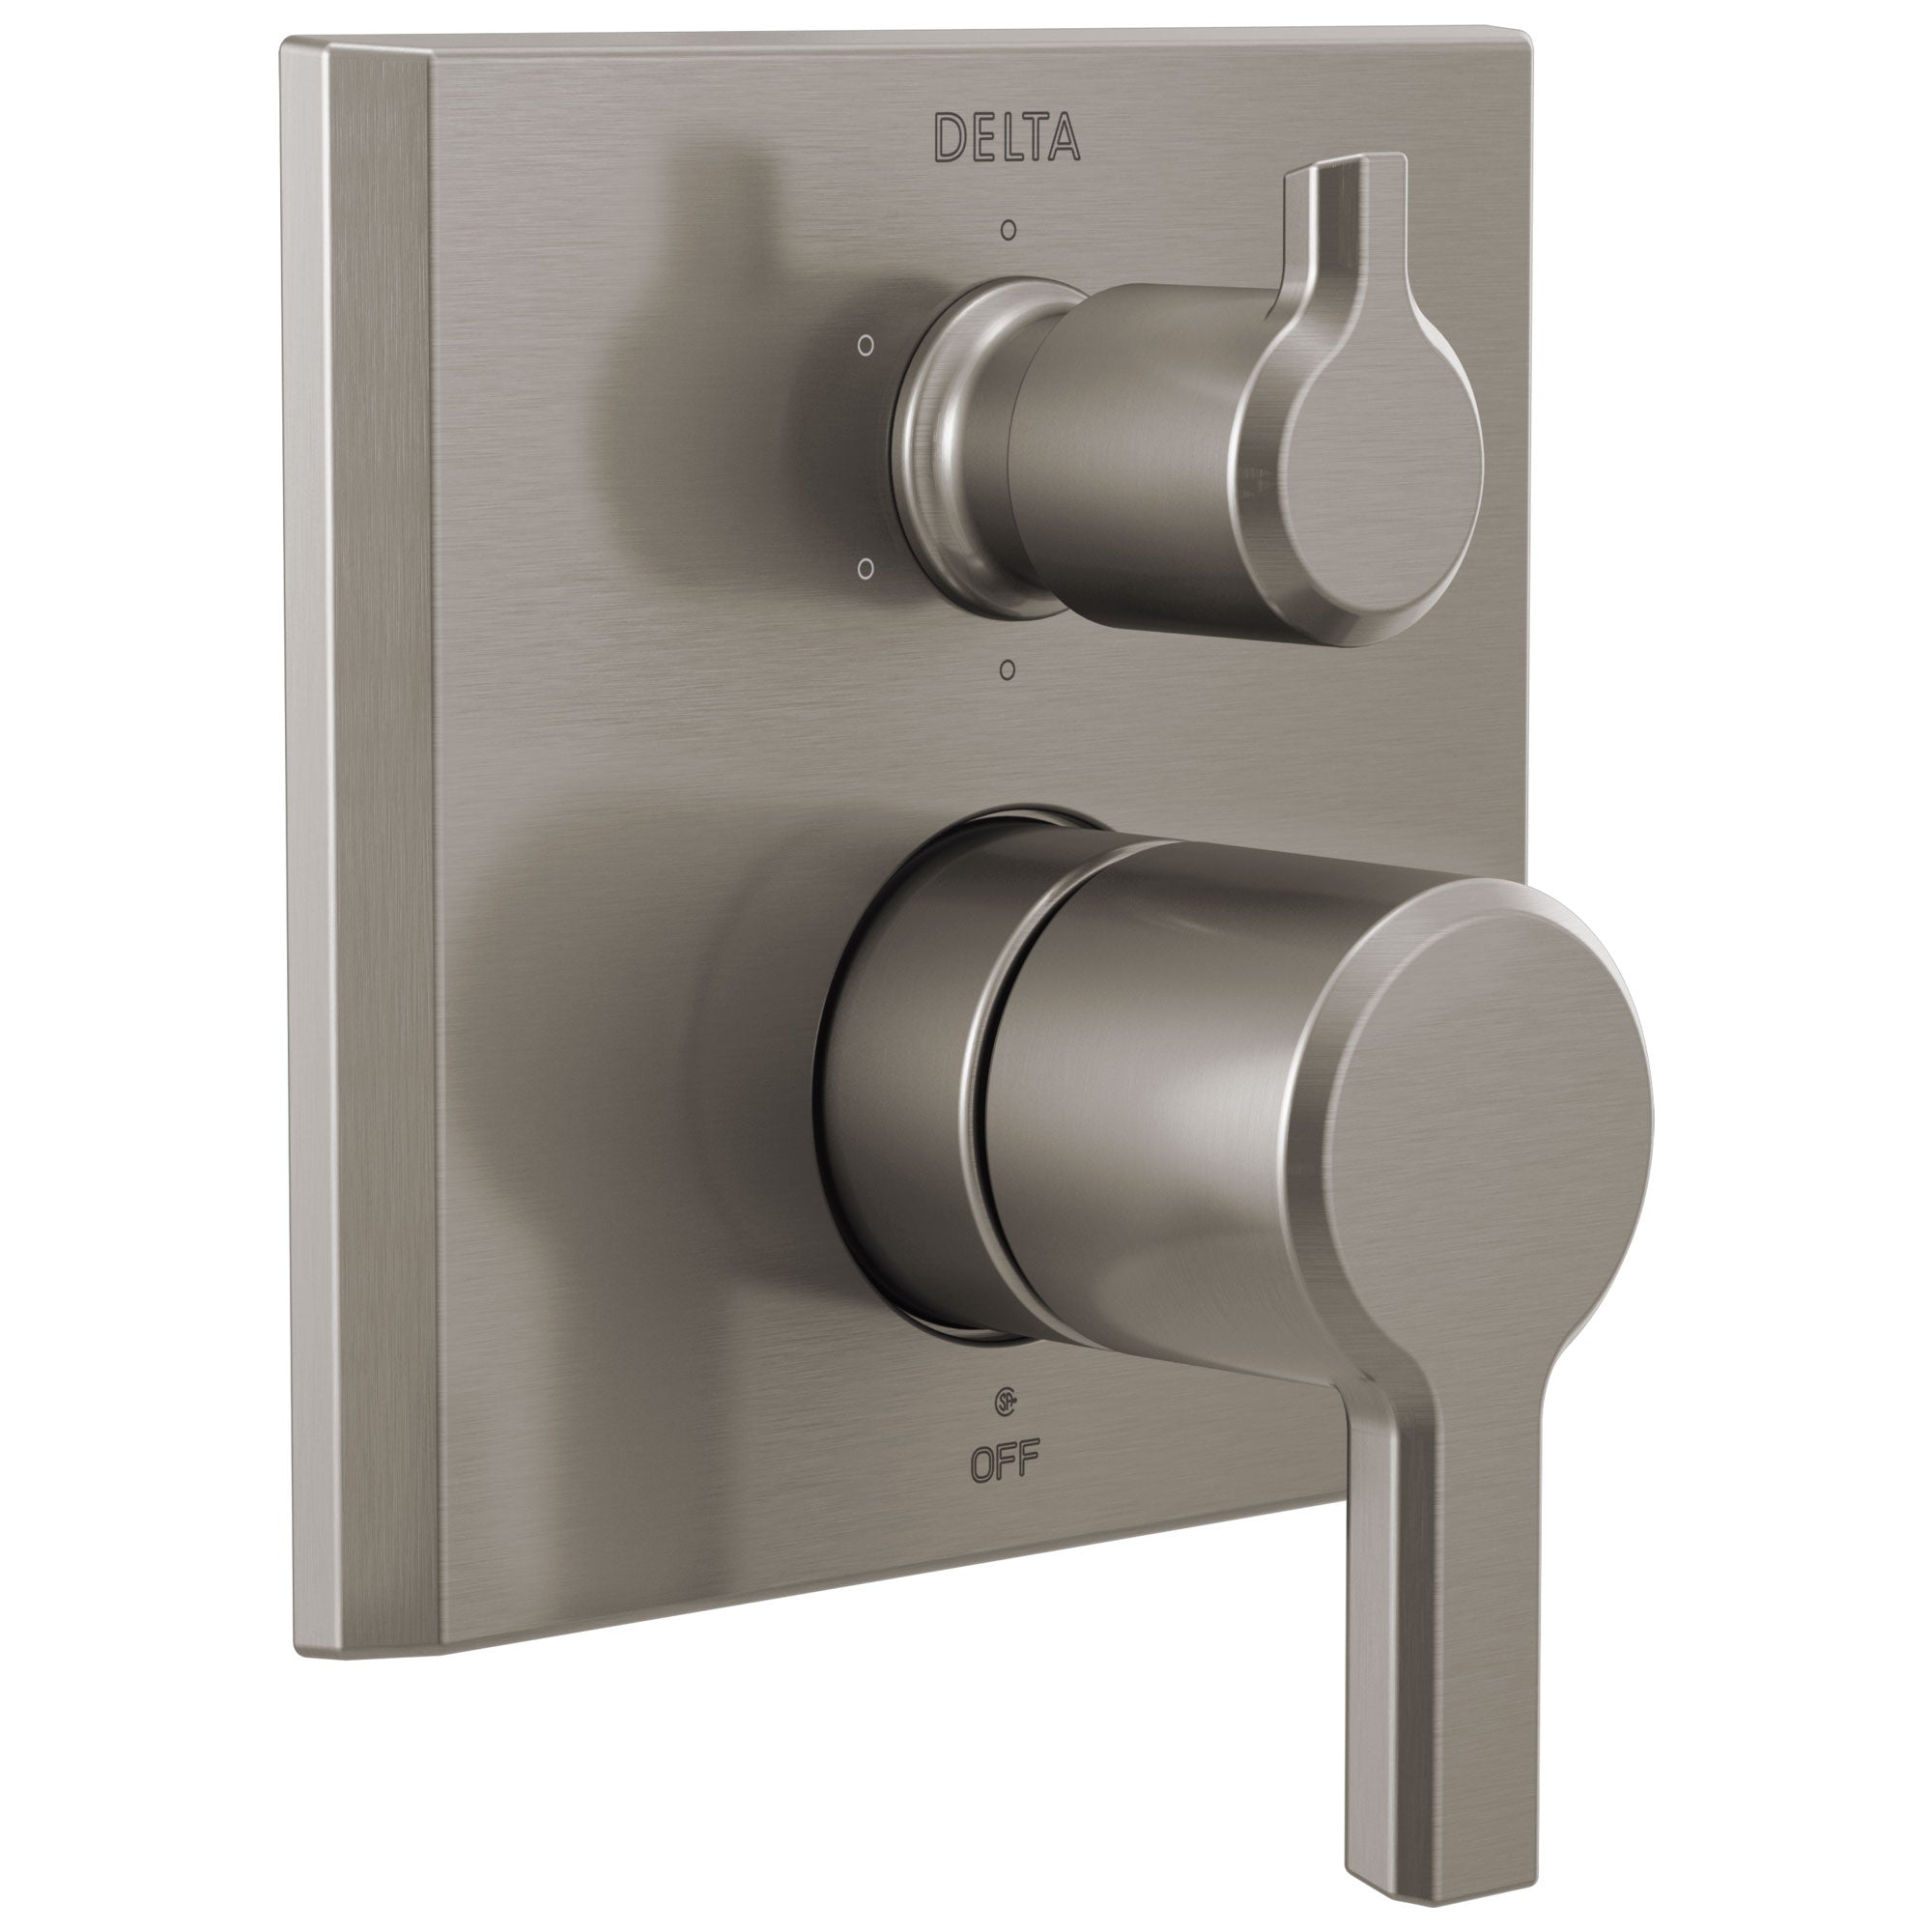 Delta Pivotal Stainless Steel Finish 14 Series Integrated 6 Function Diverter Shower Control Trim Kit (Requires Valve) DT24999SS